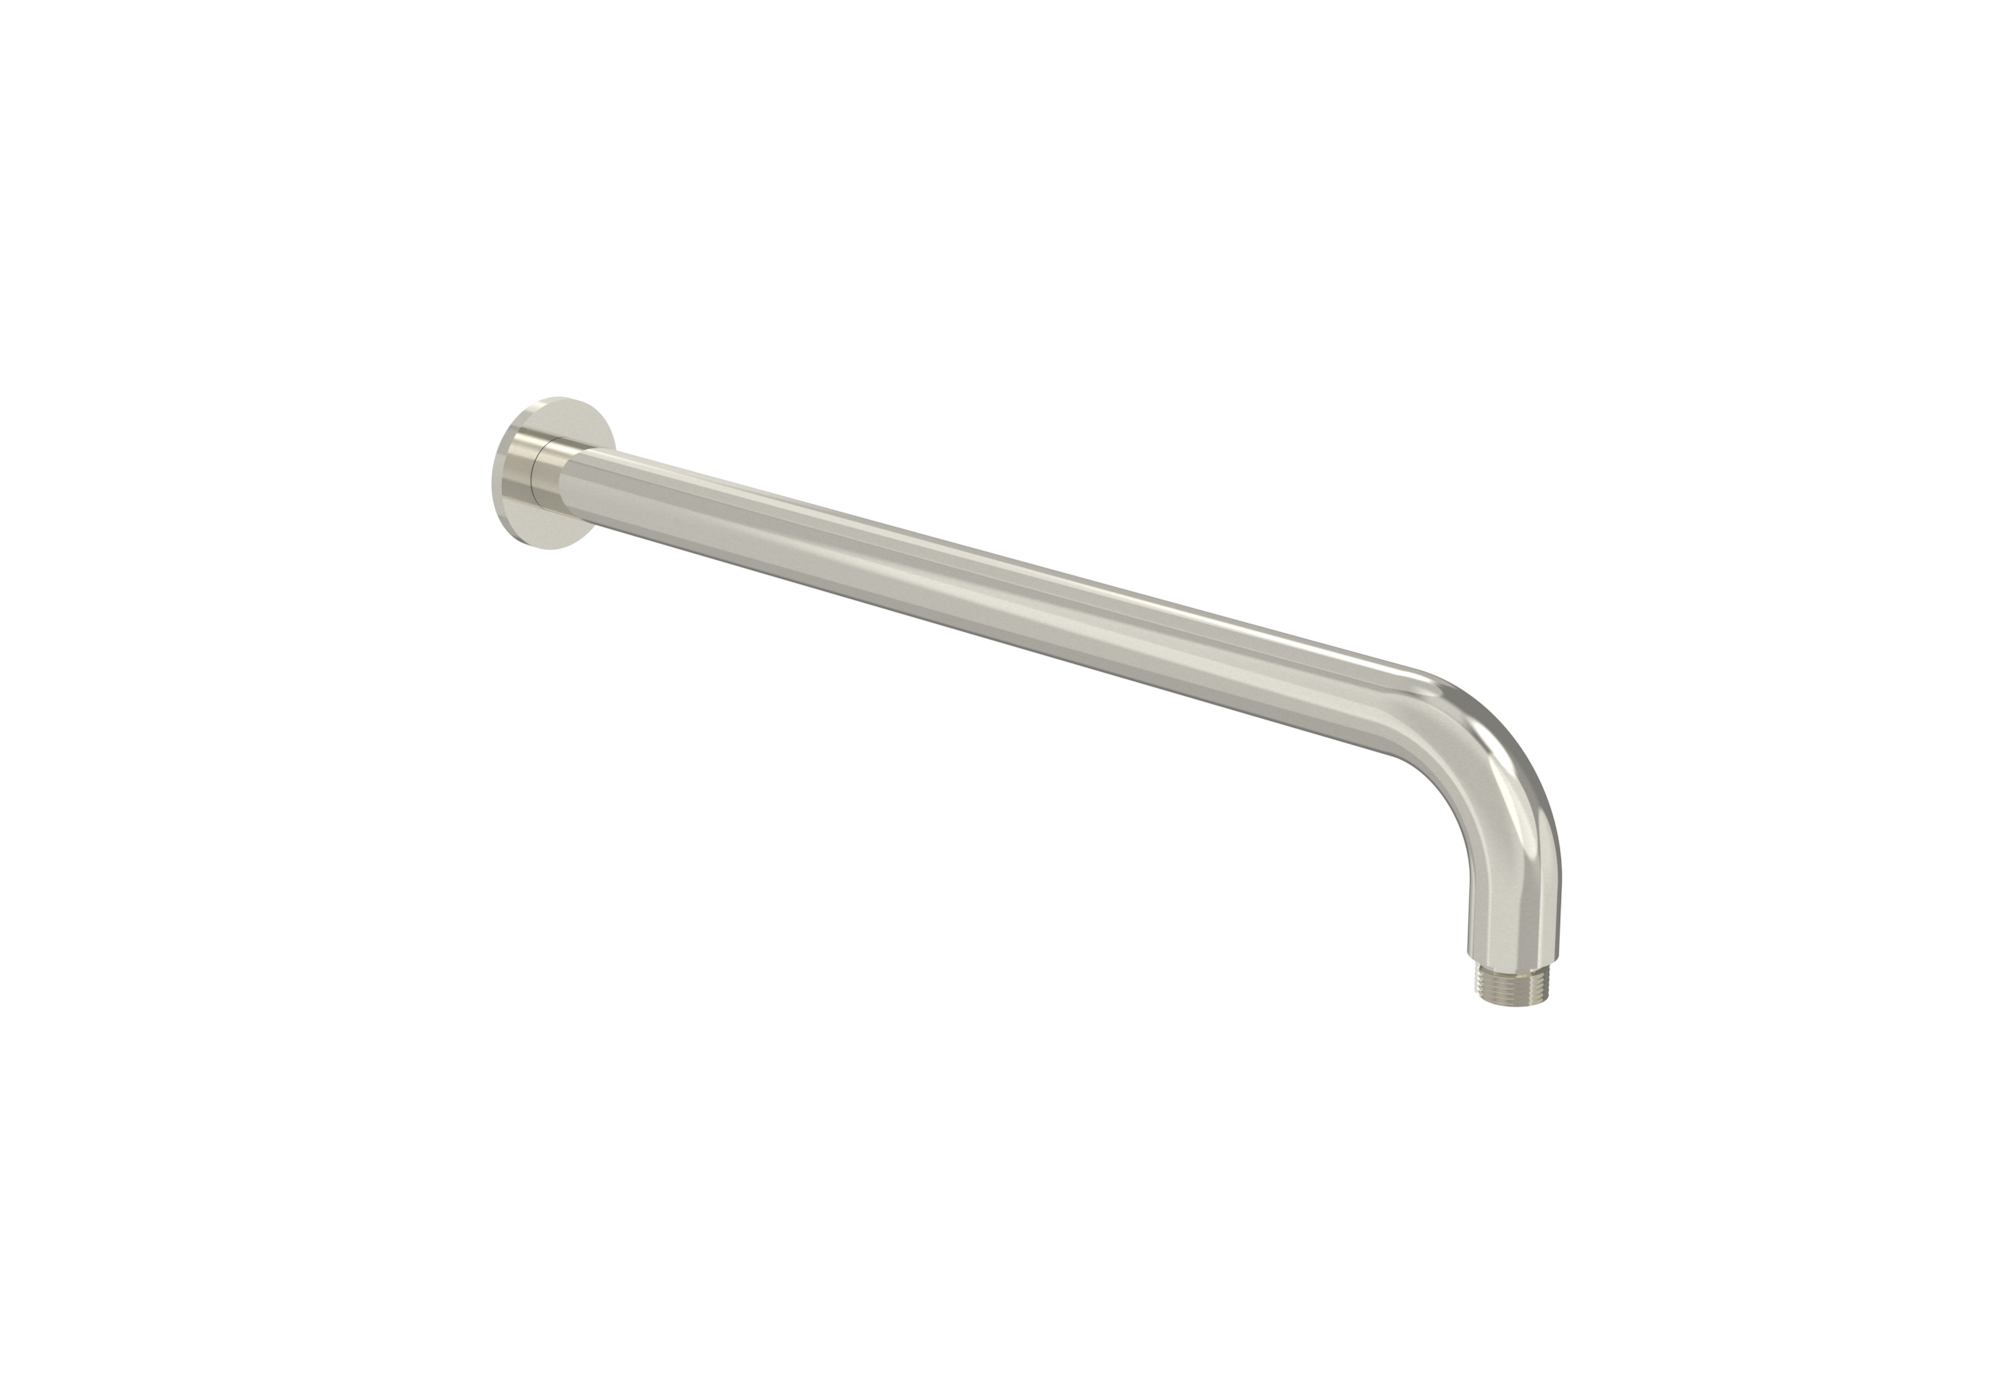 COS 400mm wall mounted shower arm - Brushed Nickel